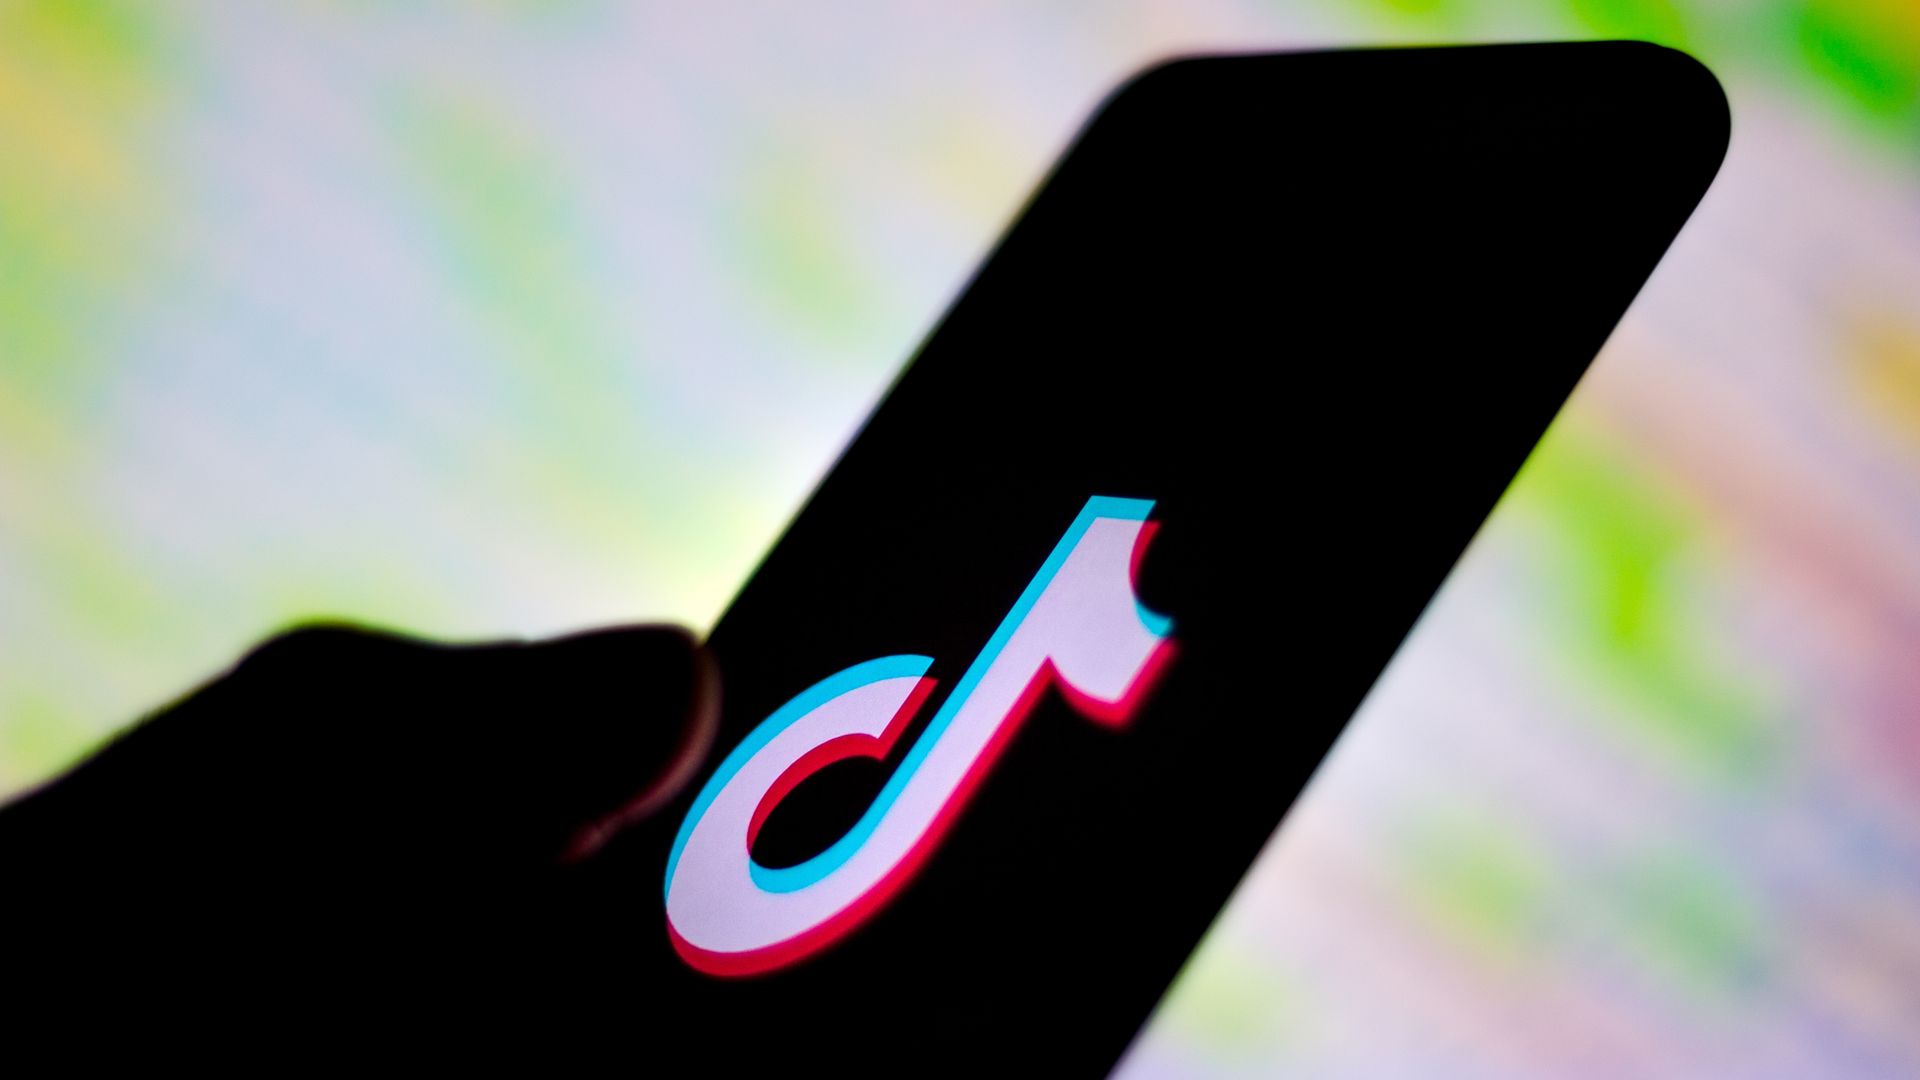 A photo illustration of a hand holding a smartphone with the TikTok logo on the screen.